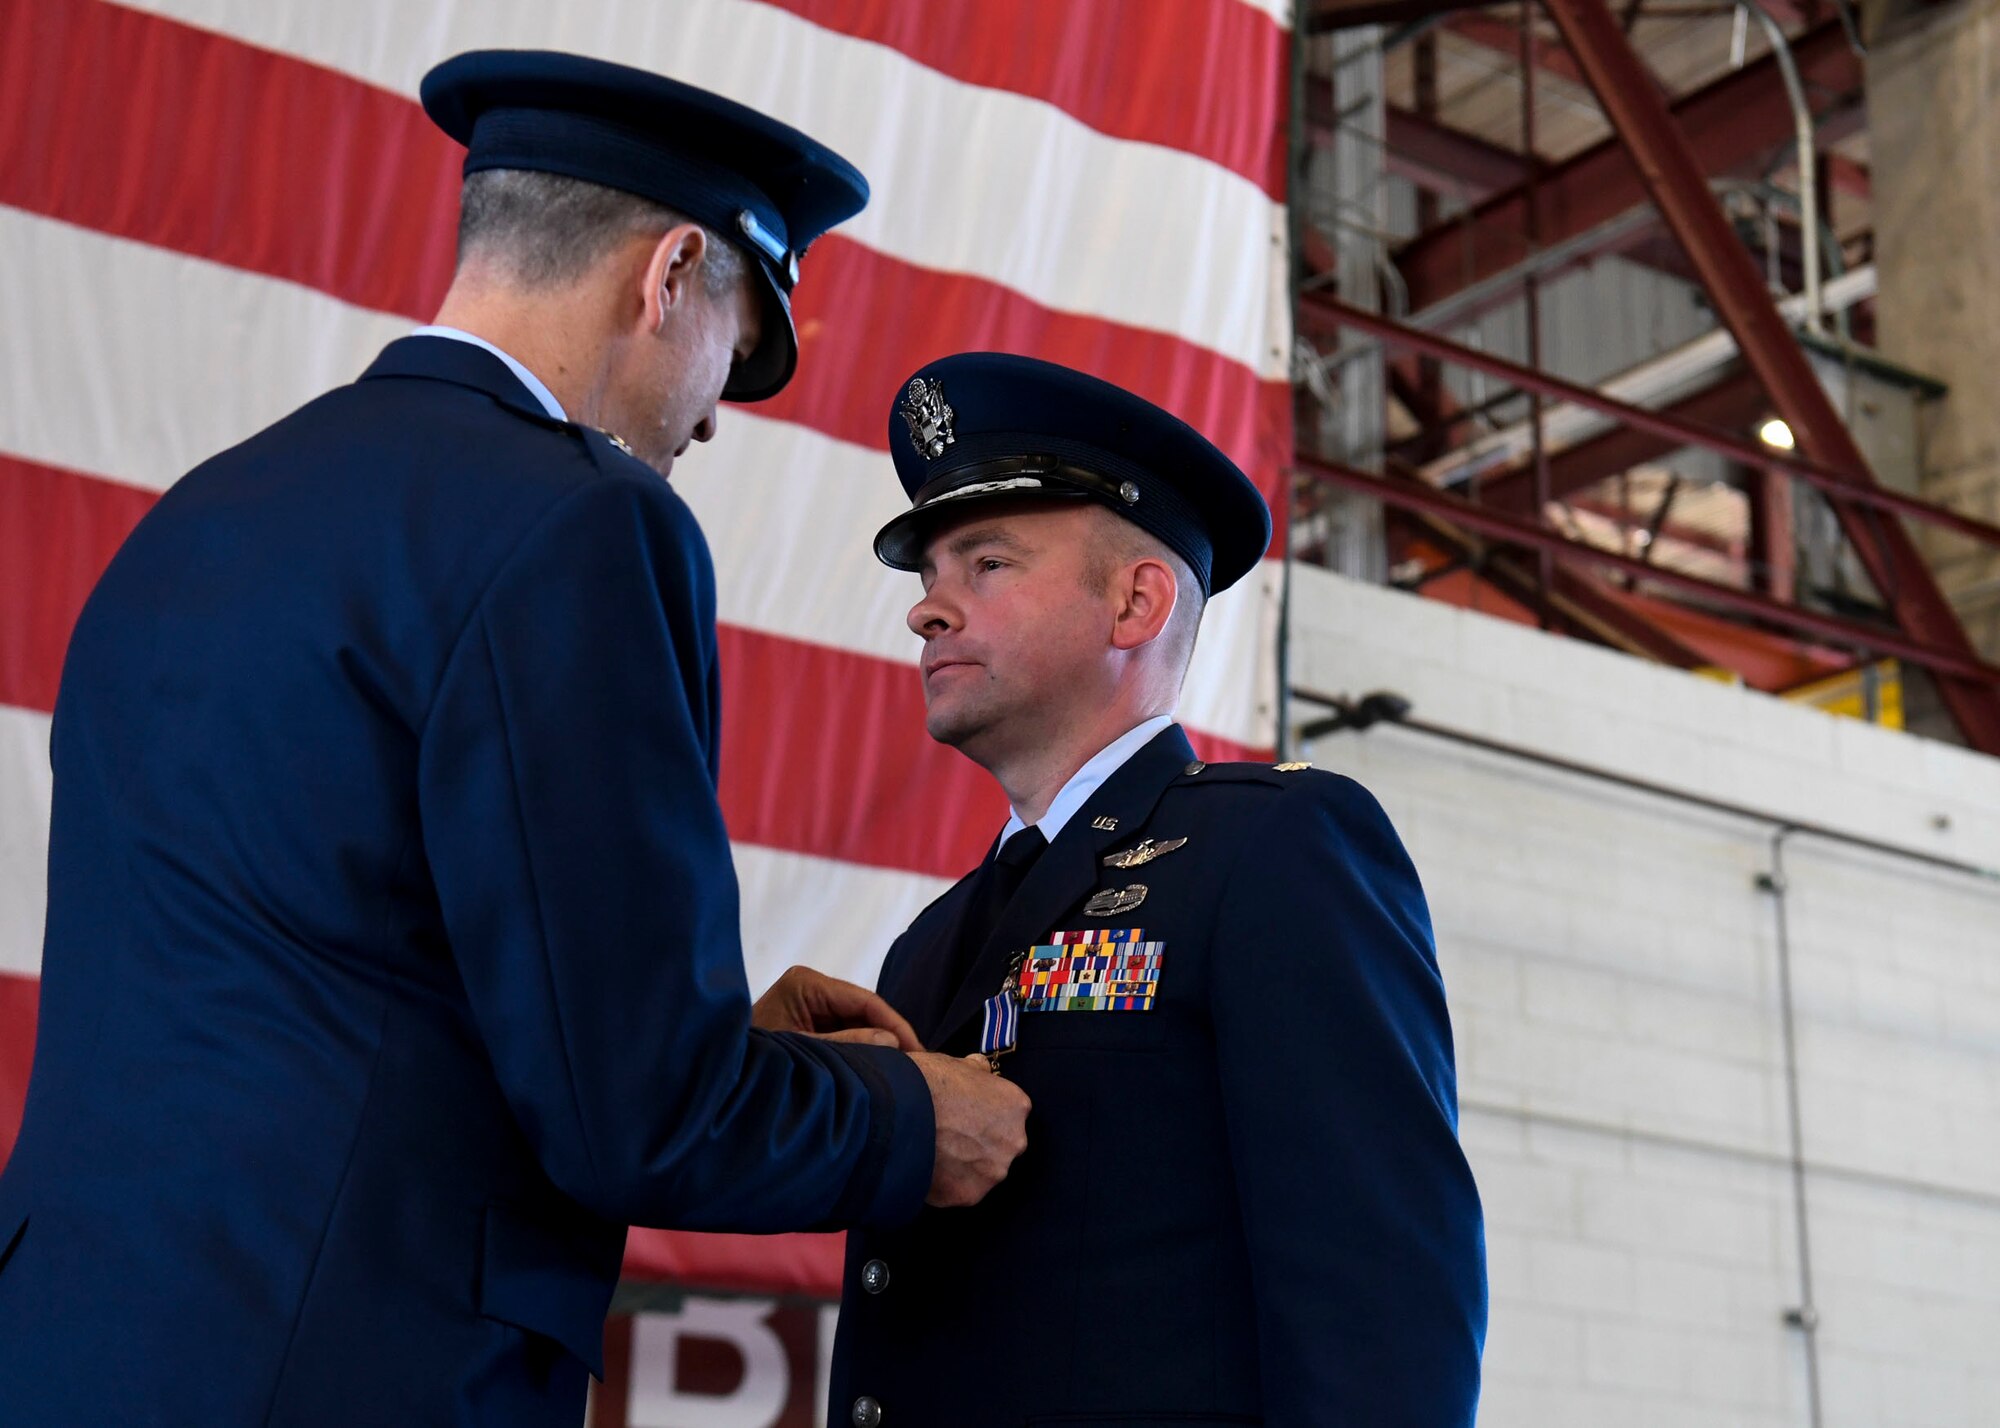 An Airman is awarded the Bronze Star Medal.